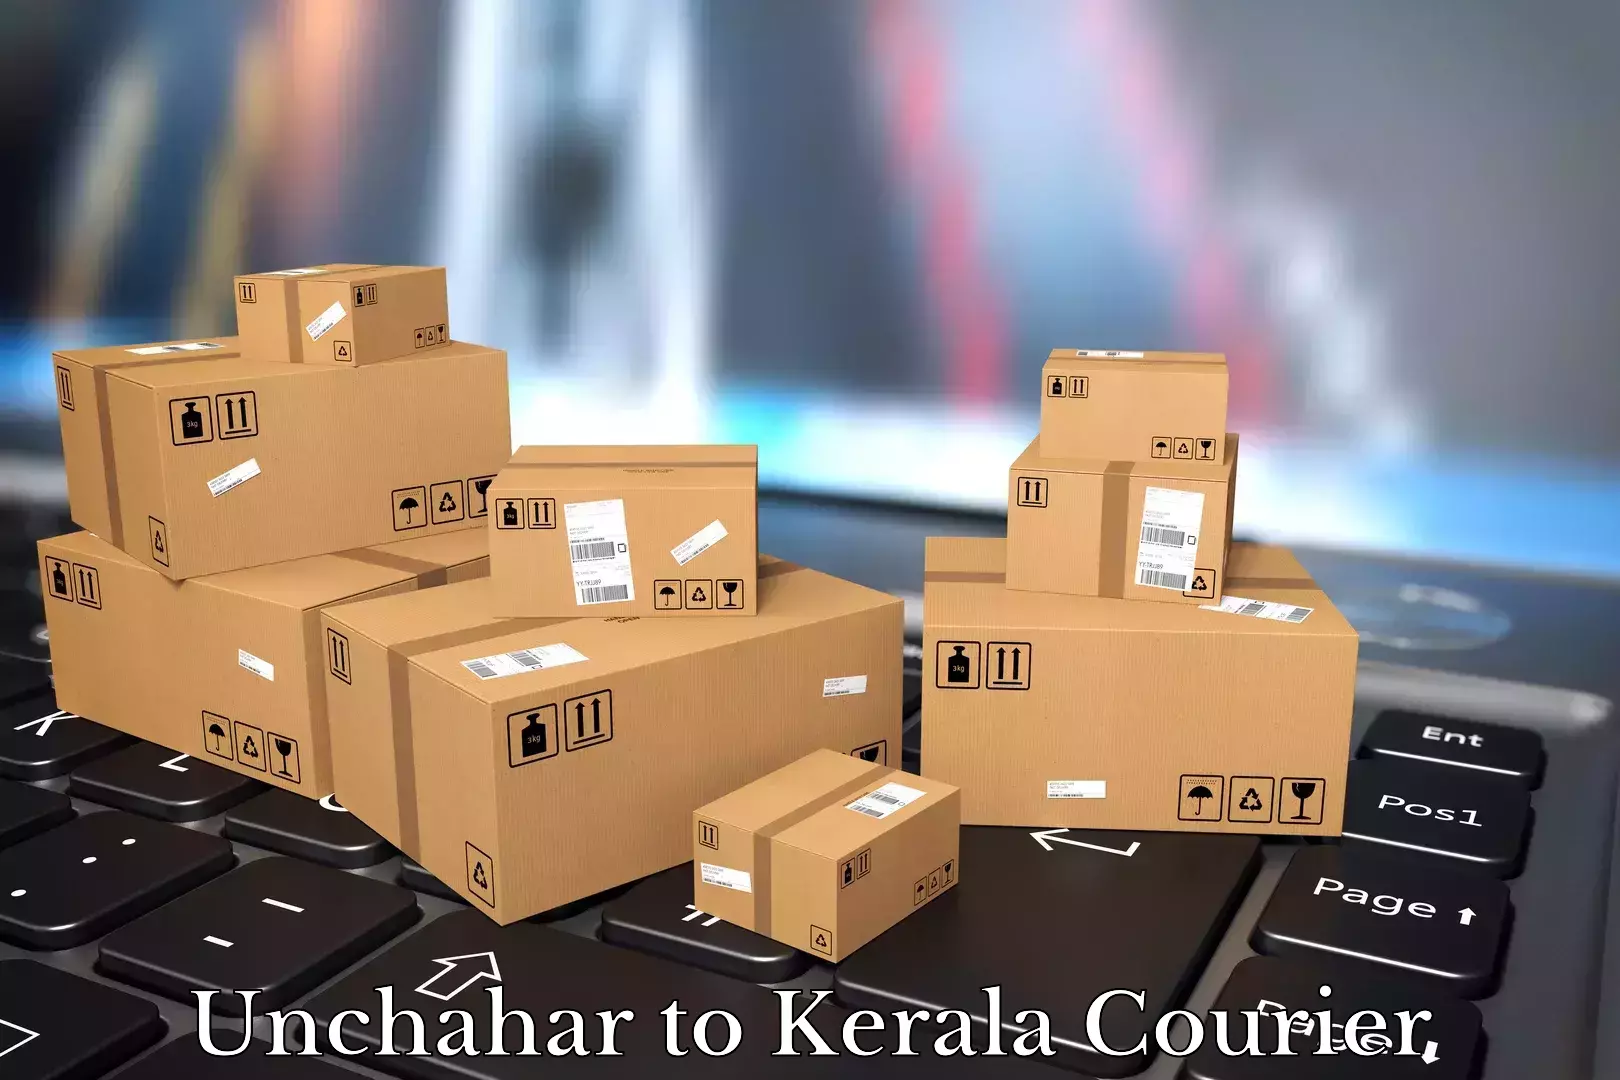 Furniture transport specialists Unchahar to Kerala